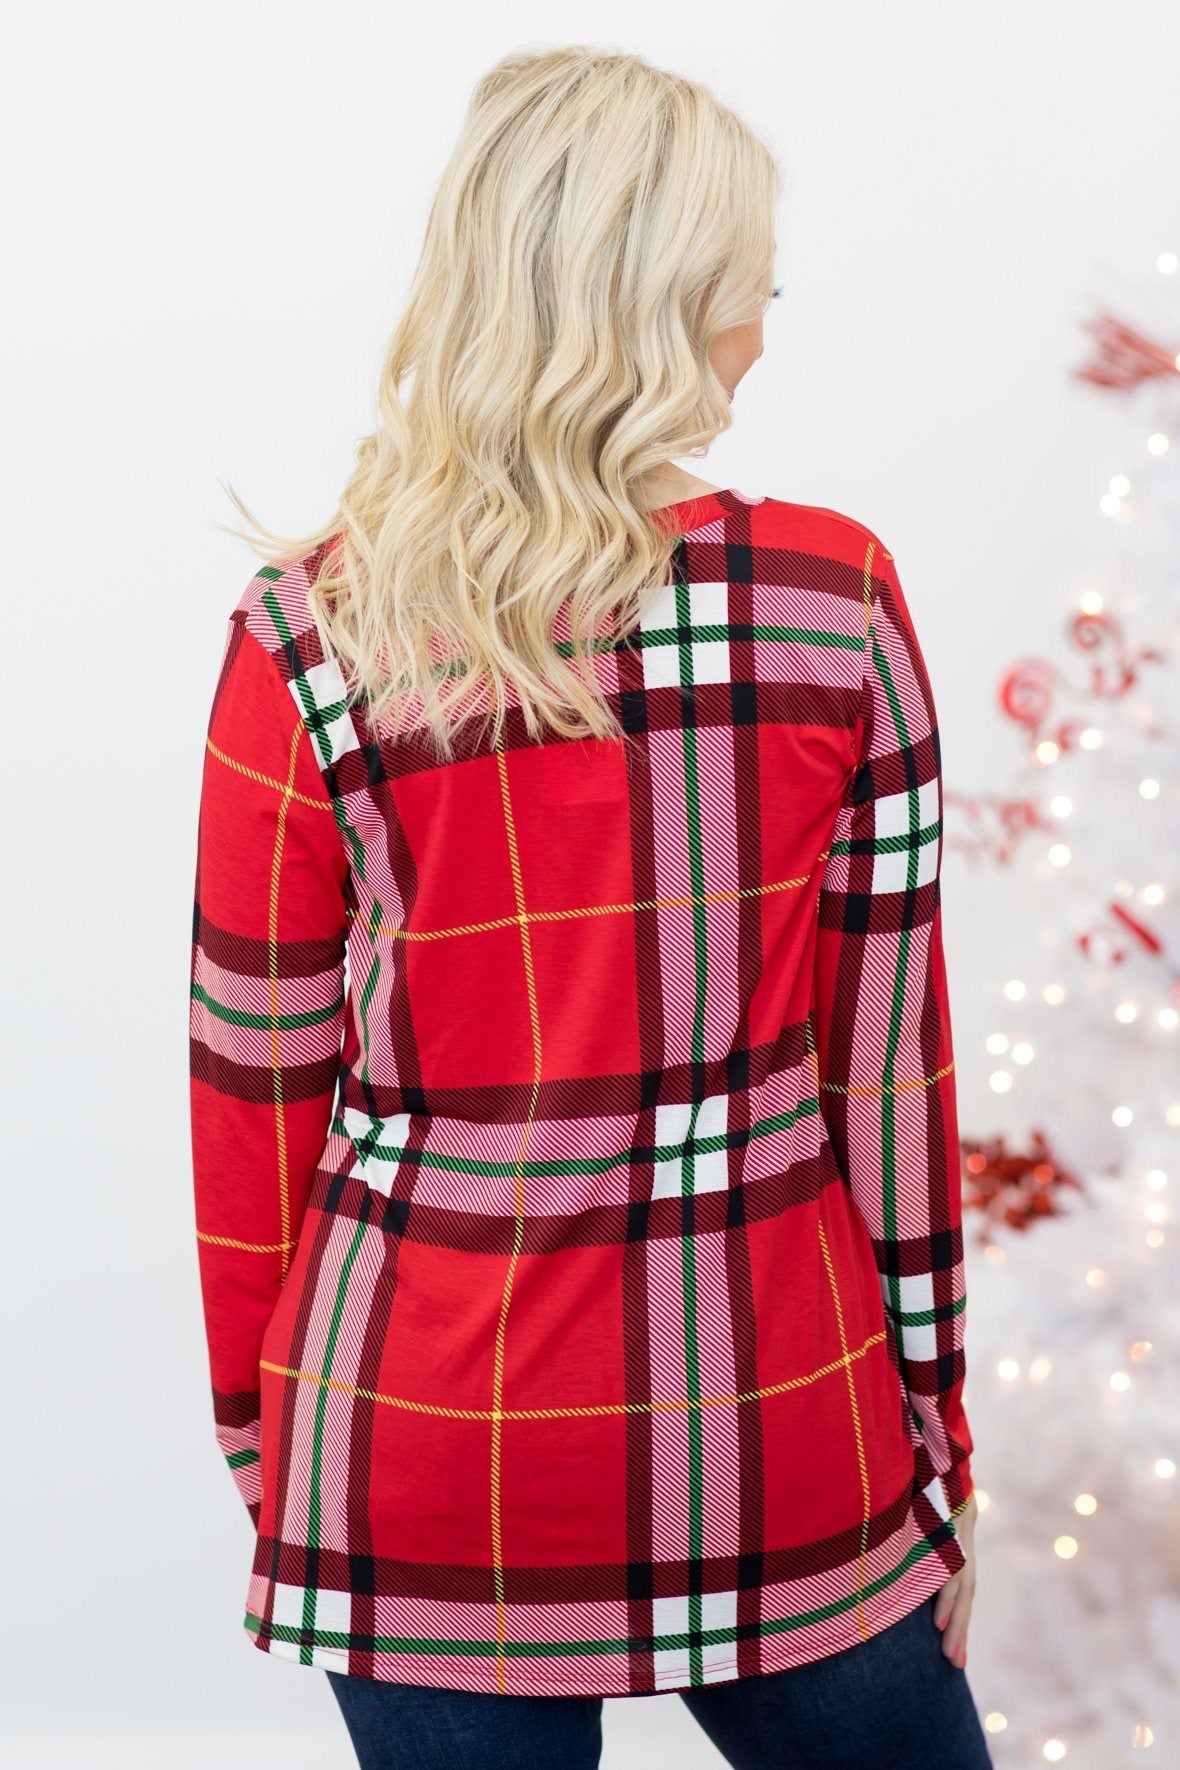 Red & Green Plaid Long Sleeve V Neck Top - Filly Flair